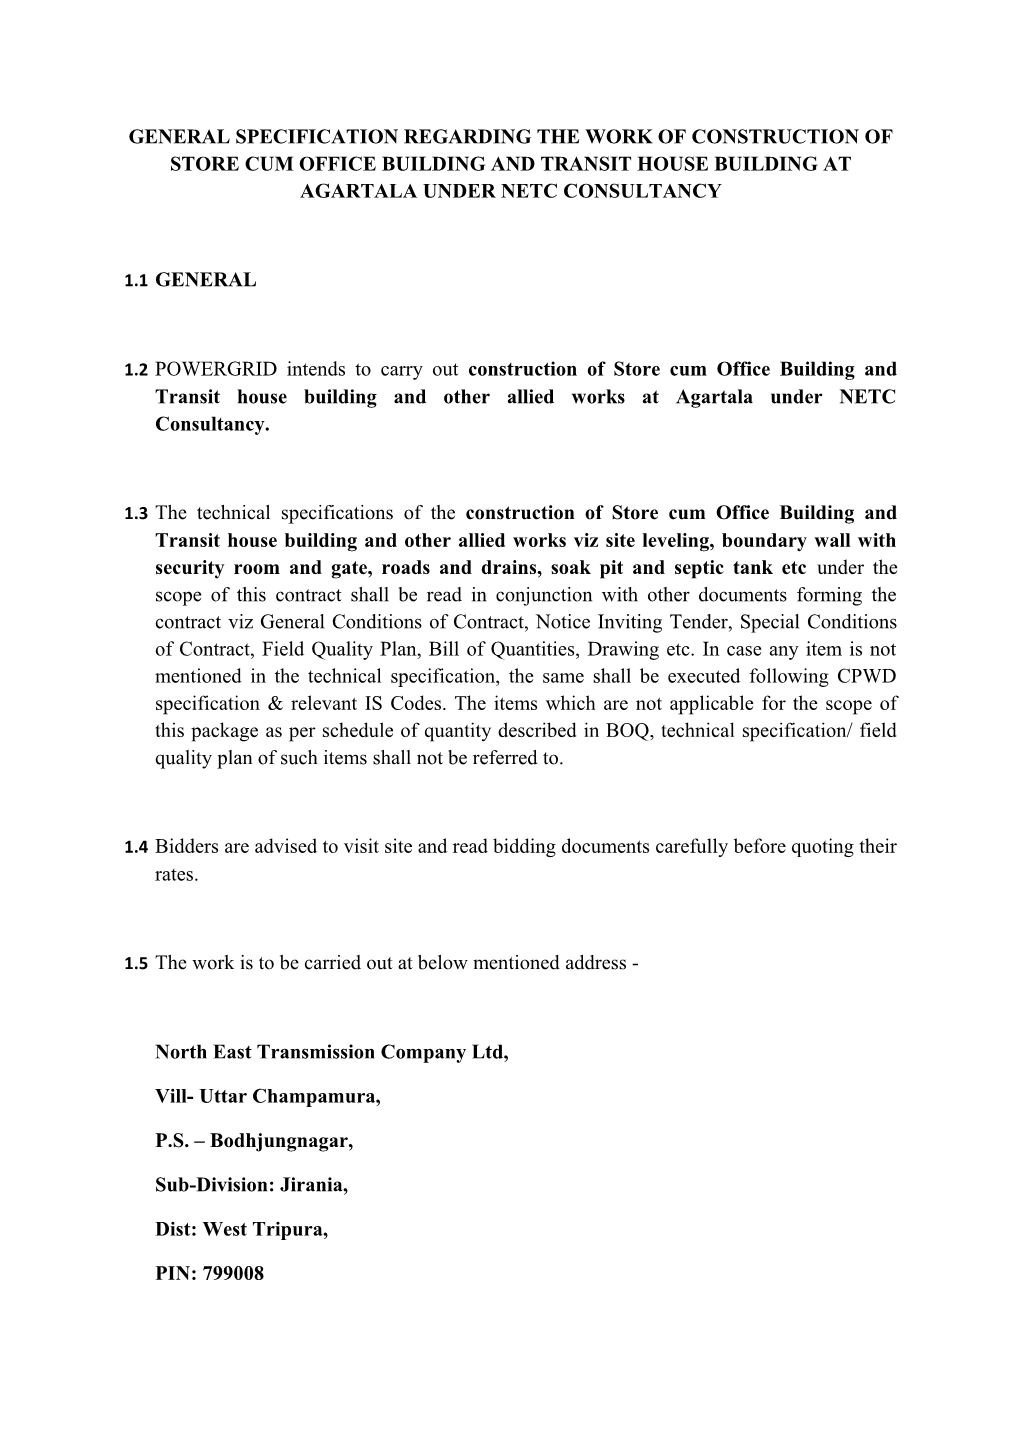 General Specification Regarding the Work of Construction of Store Cum Office Building